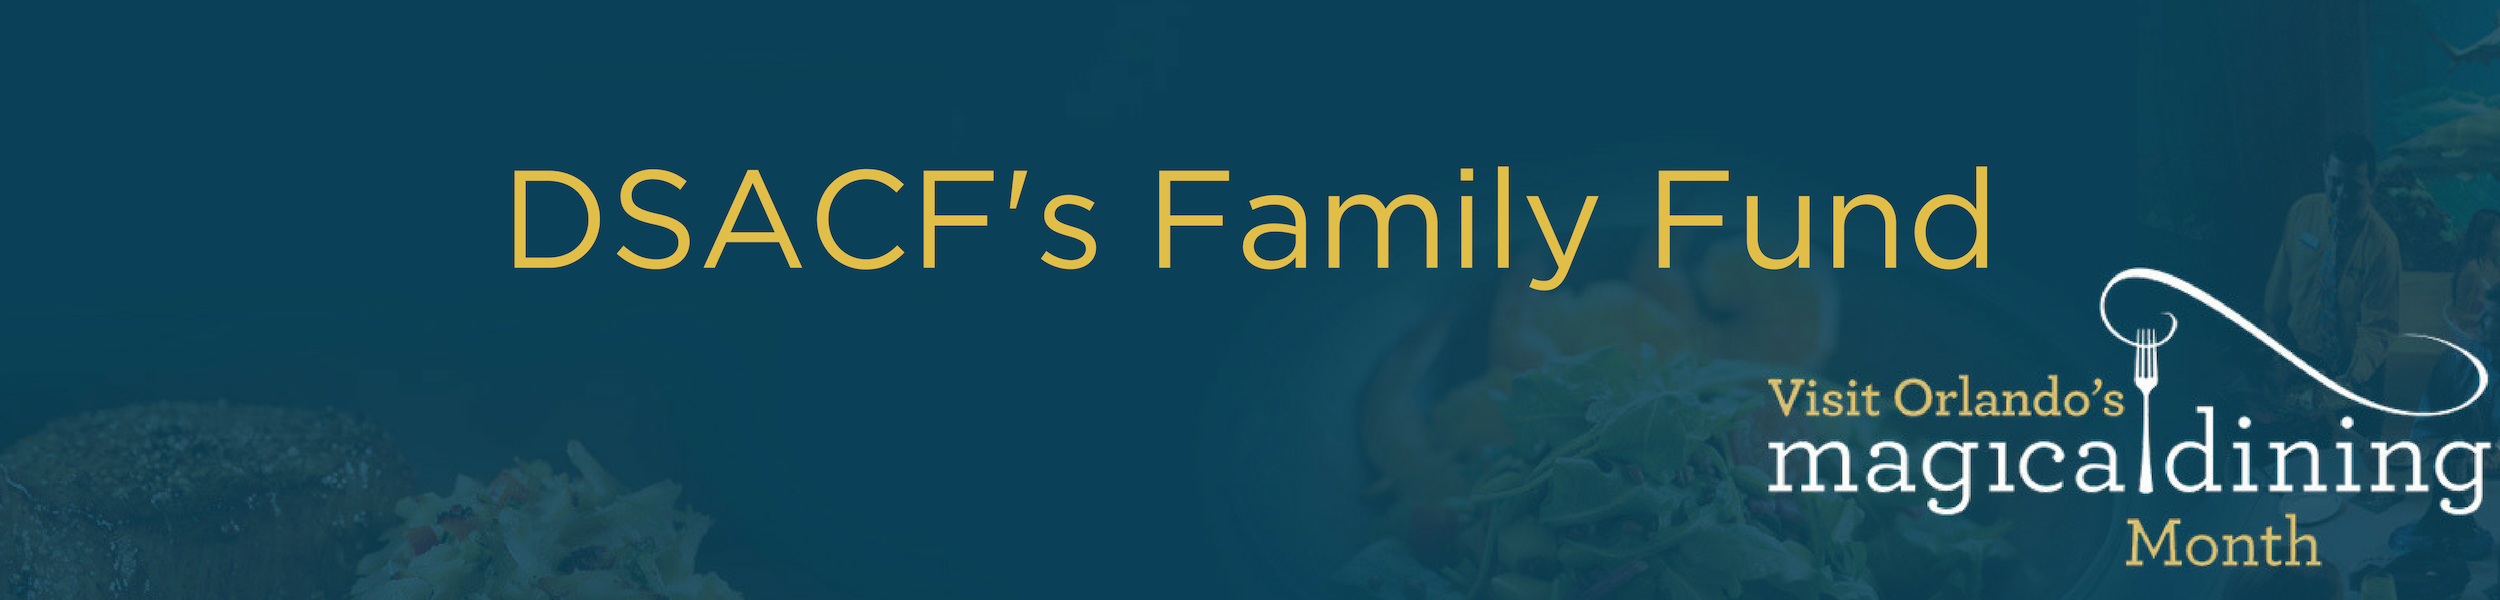 DSACF'S Family Fund.png